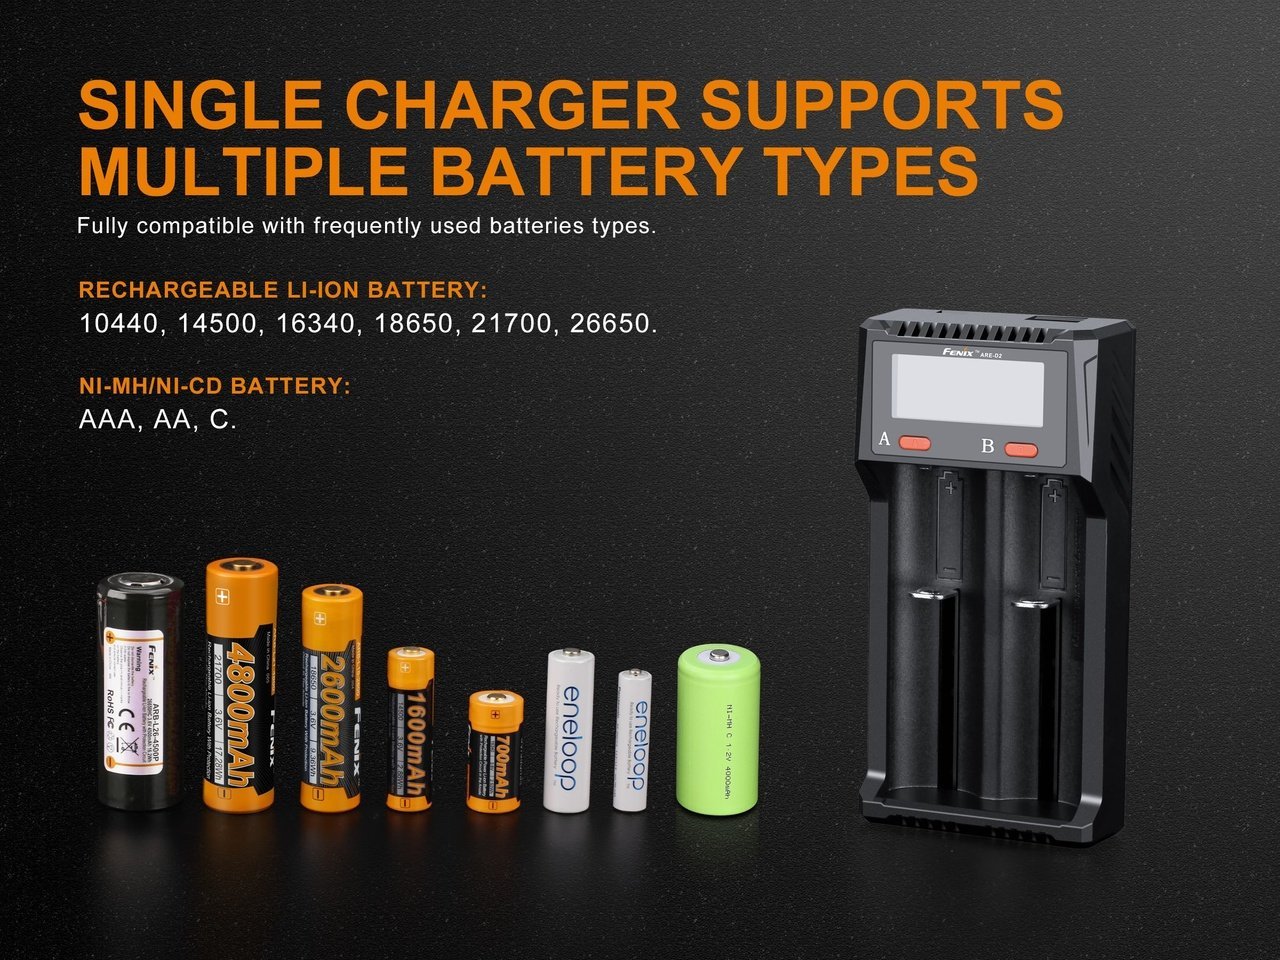 ARE-D2 compatible with multiple battery types